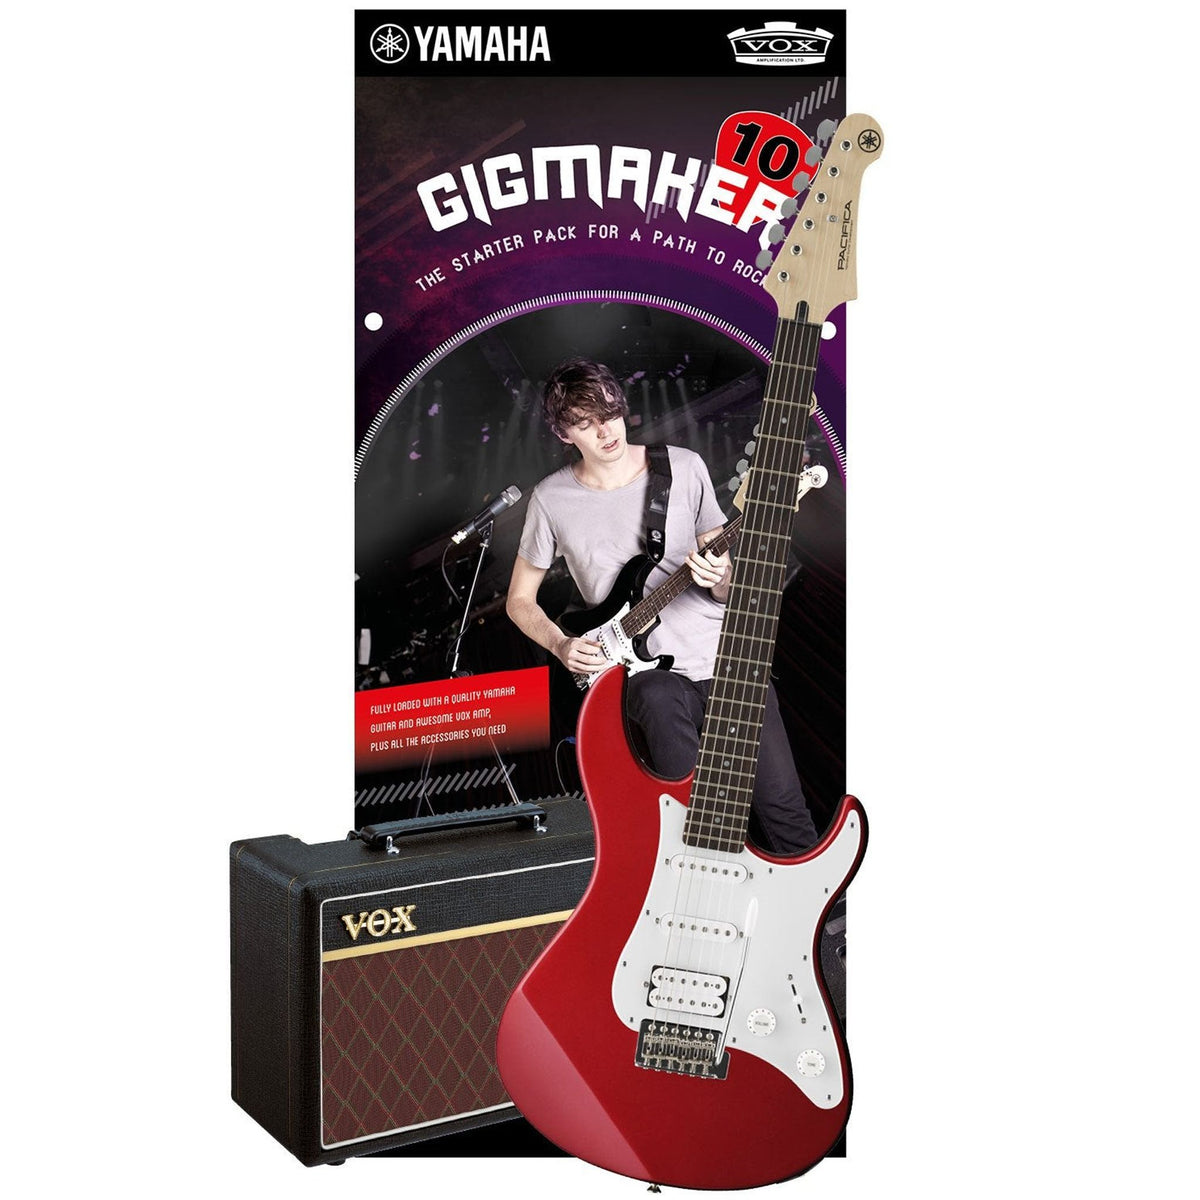 The Yamaha PAC012 Gigmaker Electric Guitar Pack is an amazing starter pack. Loaded with all the accessories you need to start playing your instrument.